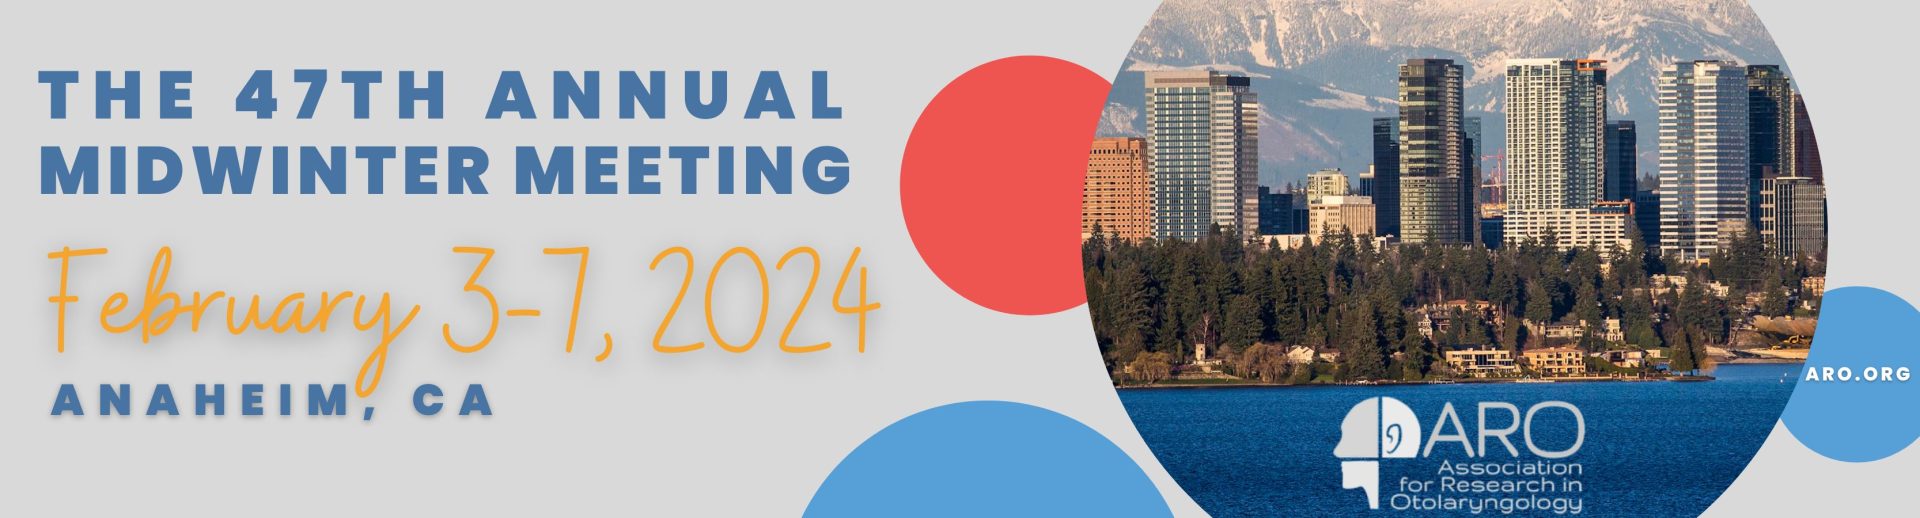 2024 MidWinter Meeting ARO Association for Research in Otolaryngology